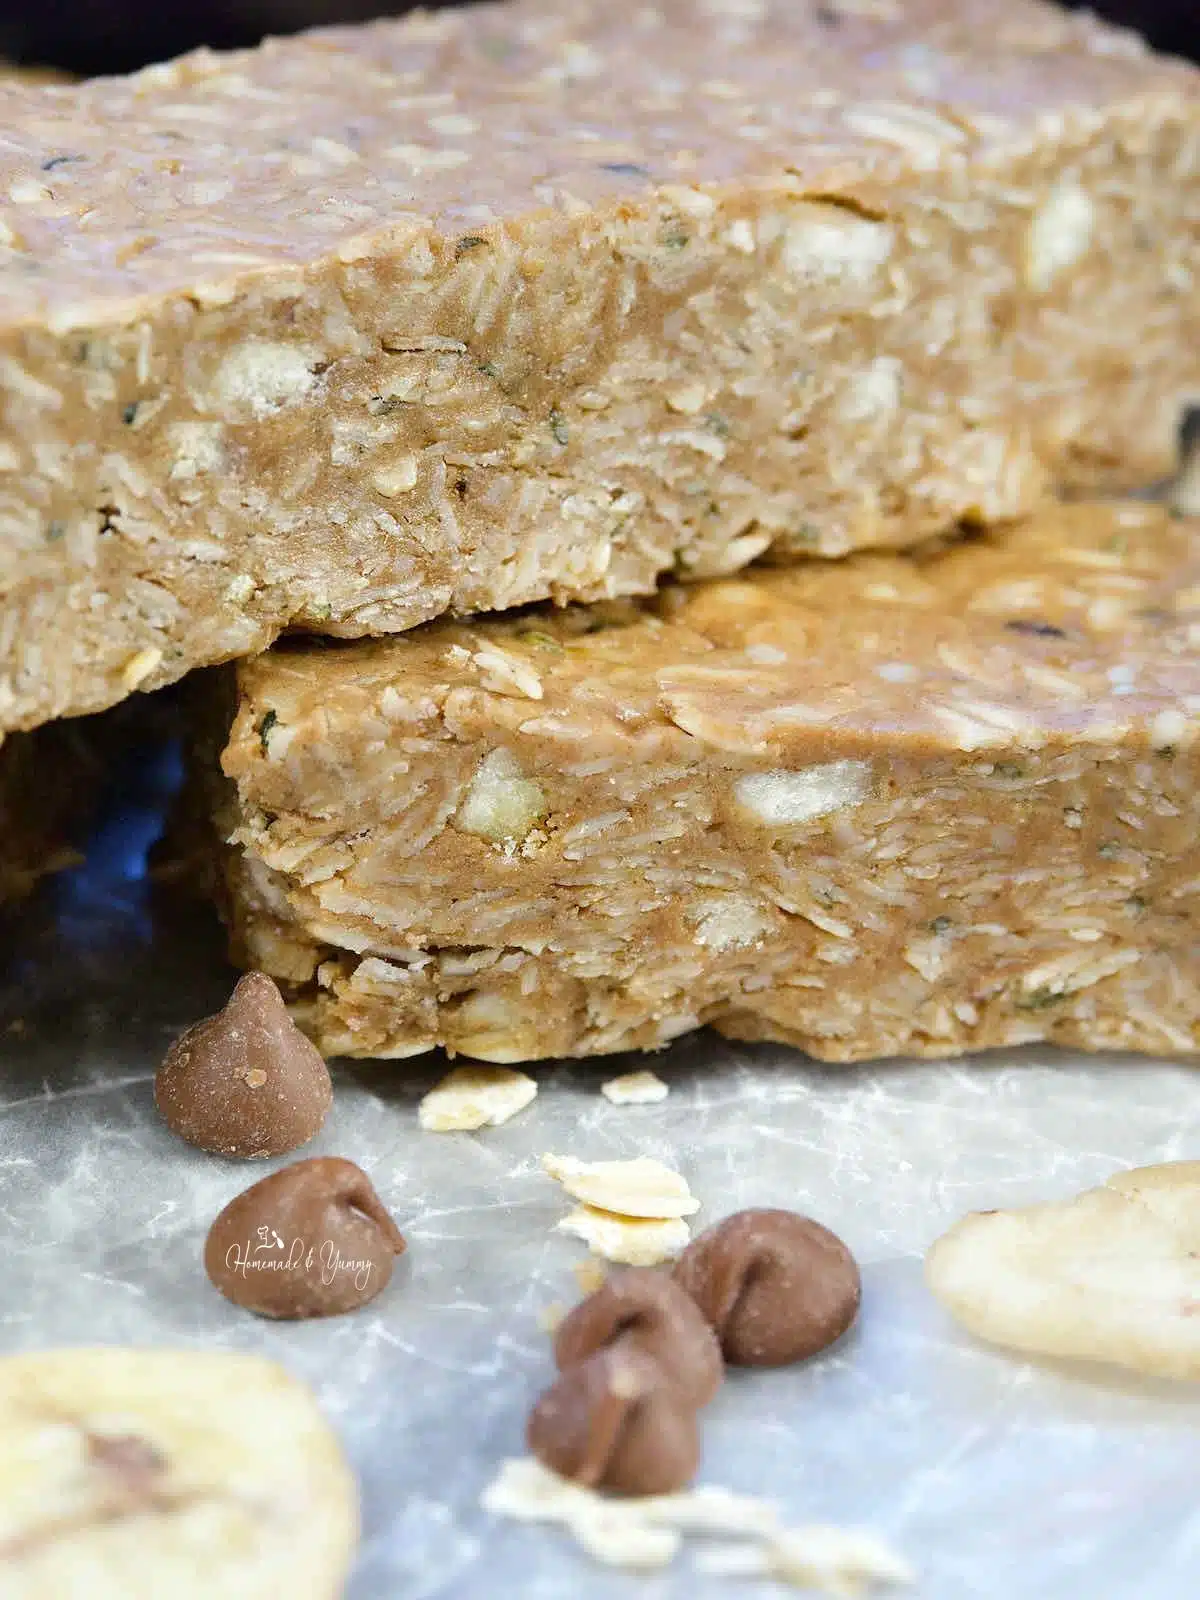 No-bake homemade granola bars with peanut butter and chocolate chips.